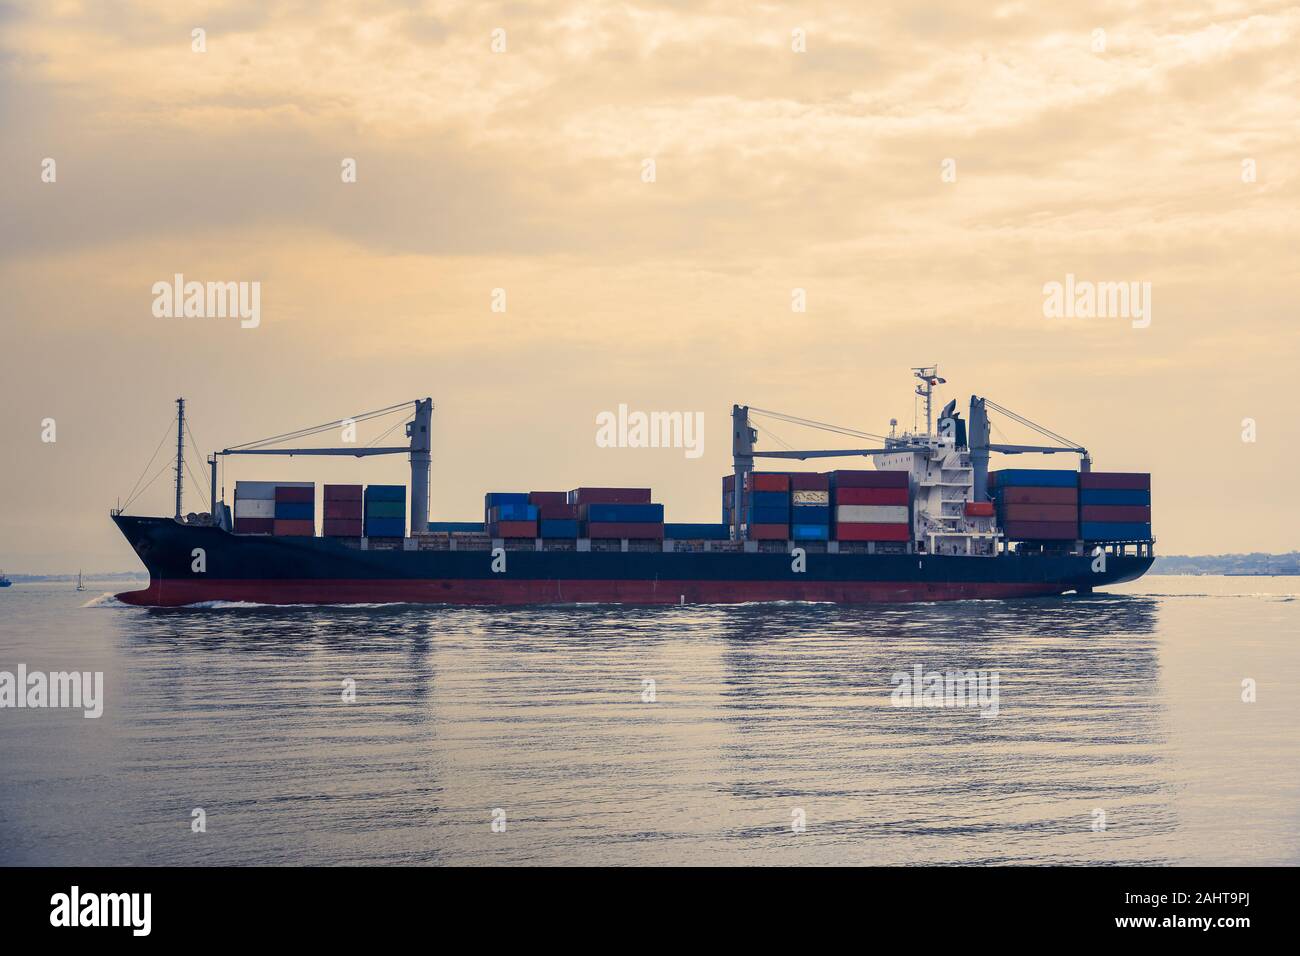 Cargo ships transporting containers in the evening light. Concept of transport and commerce by sea. Lisbon, Portugal. Europe. Stock Photo